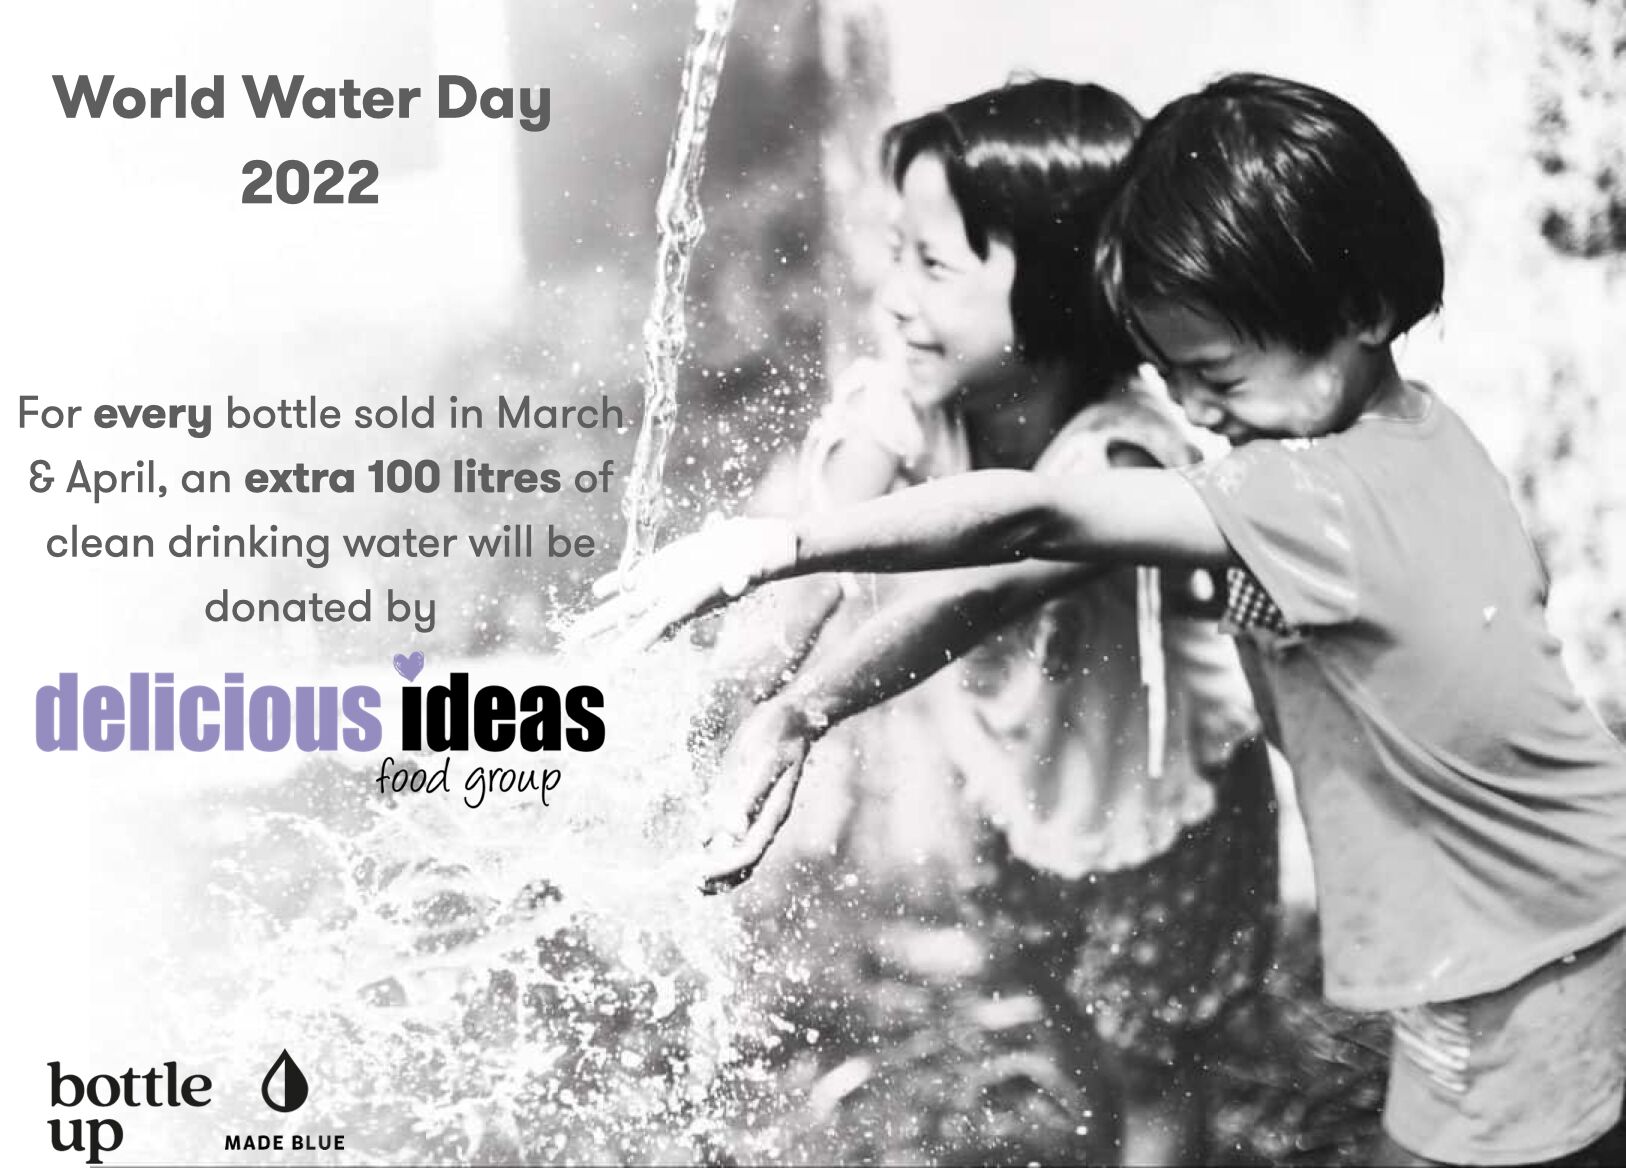 Delicious Ideas matches water donation to charity, Made Blue